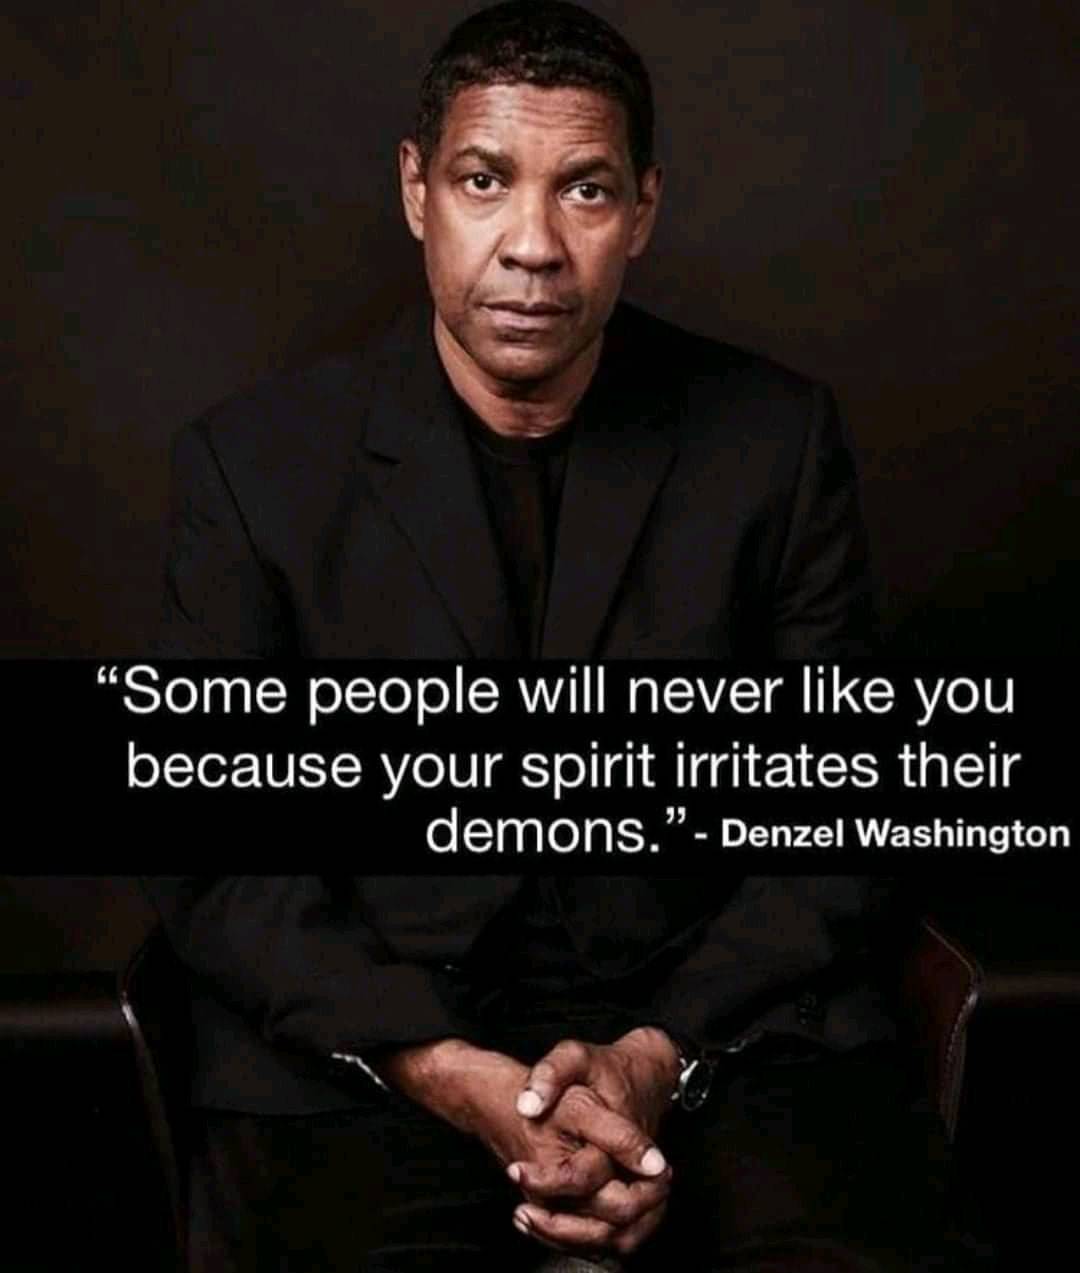 Some people will never like you because your spirit irritated their demons. – Denzel Washington